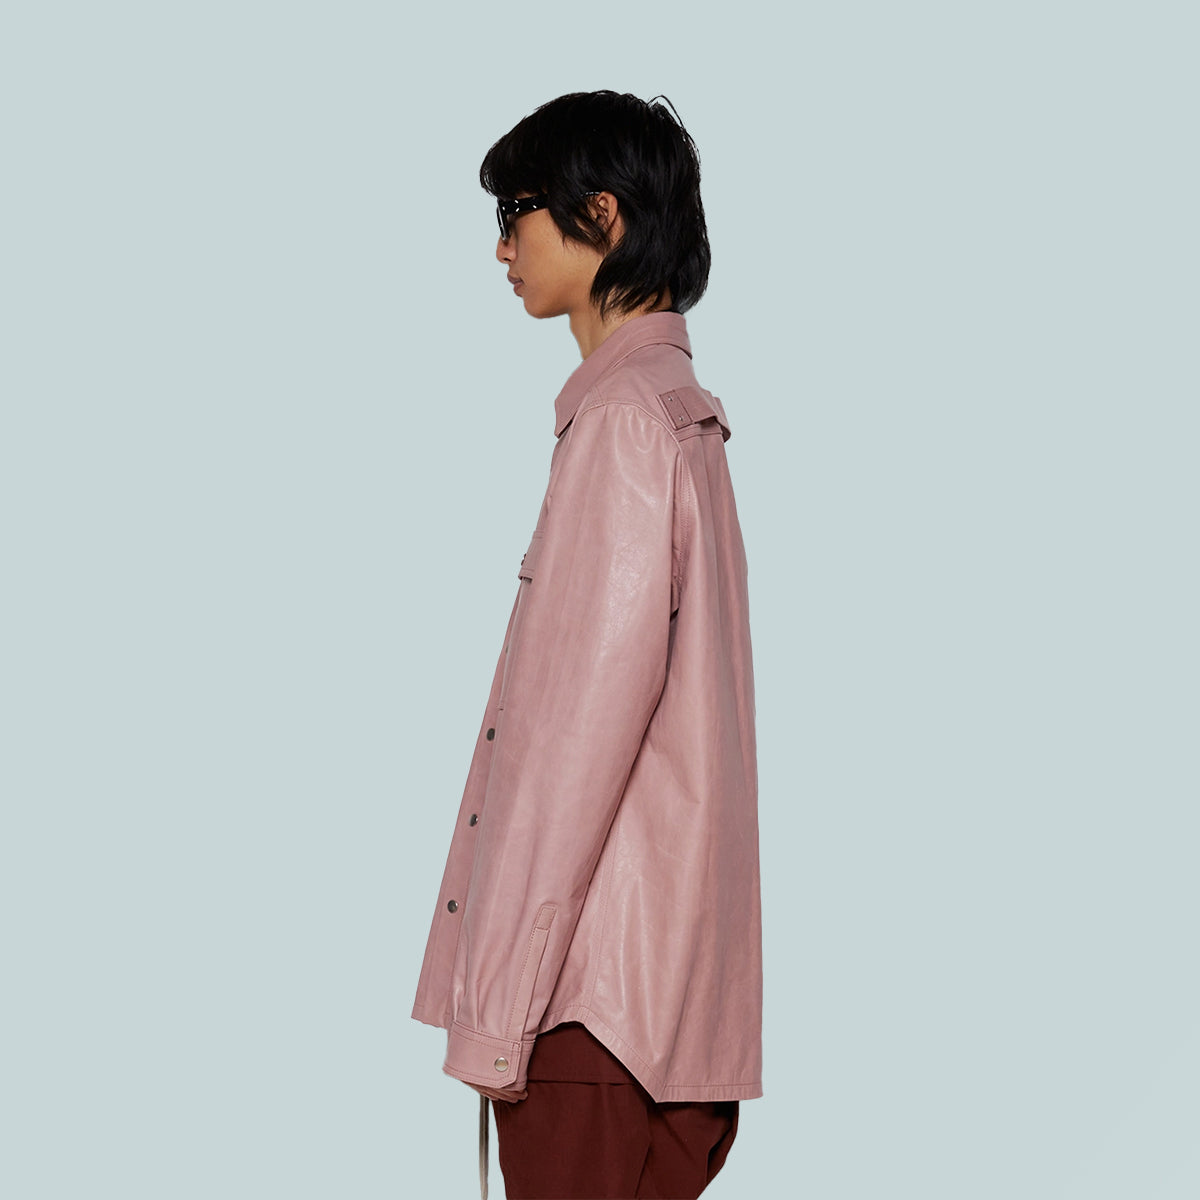 Leather Outershirt Dusty Pink